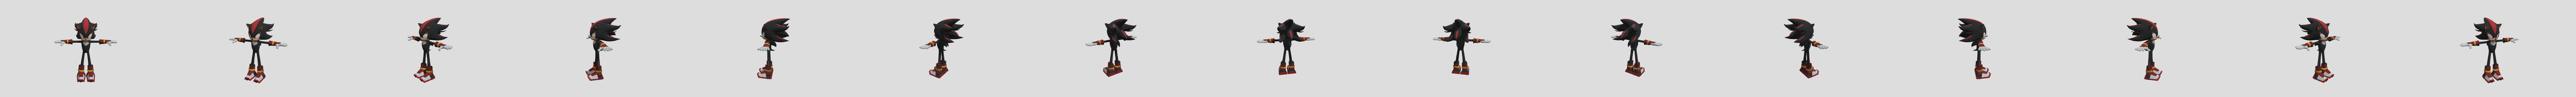 Shadow (Sonic Dash 2) Sonic Boom - Download Free 3D model by